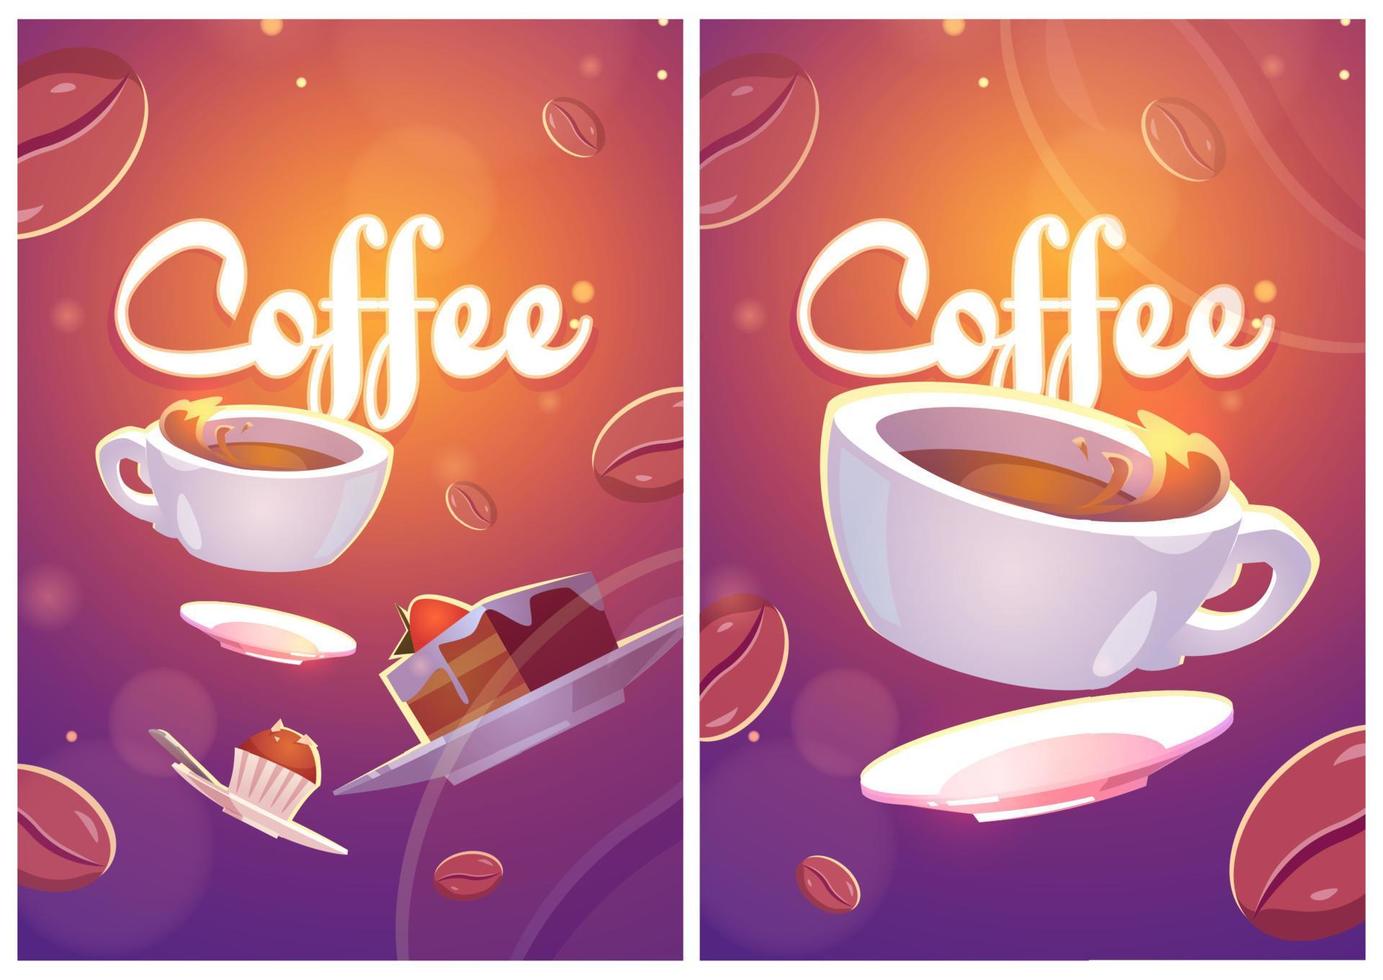 Coffee posters with illustration of cup and sweets vector